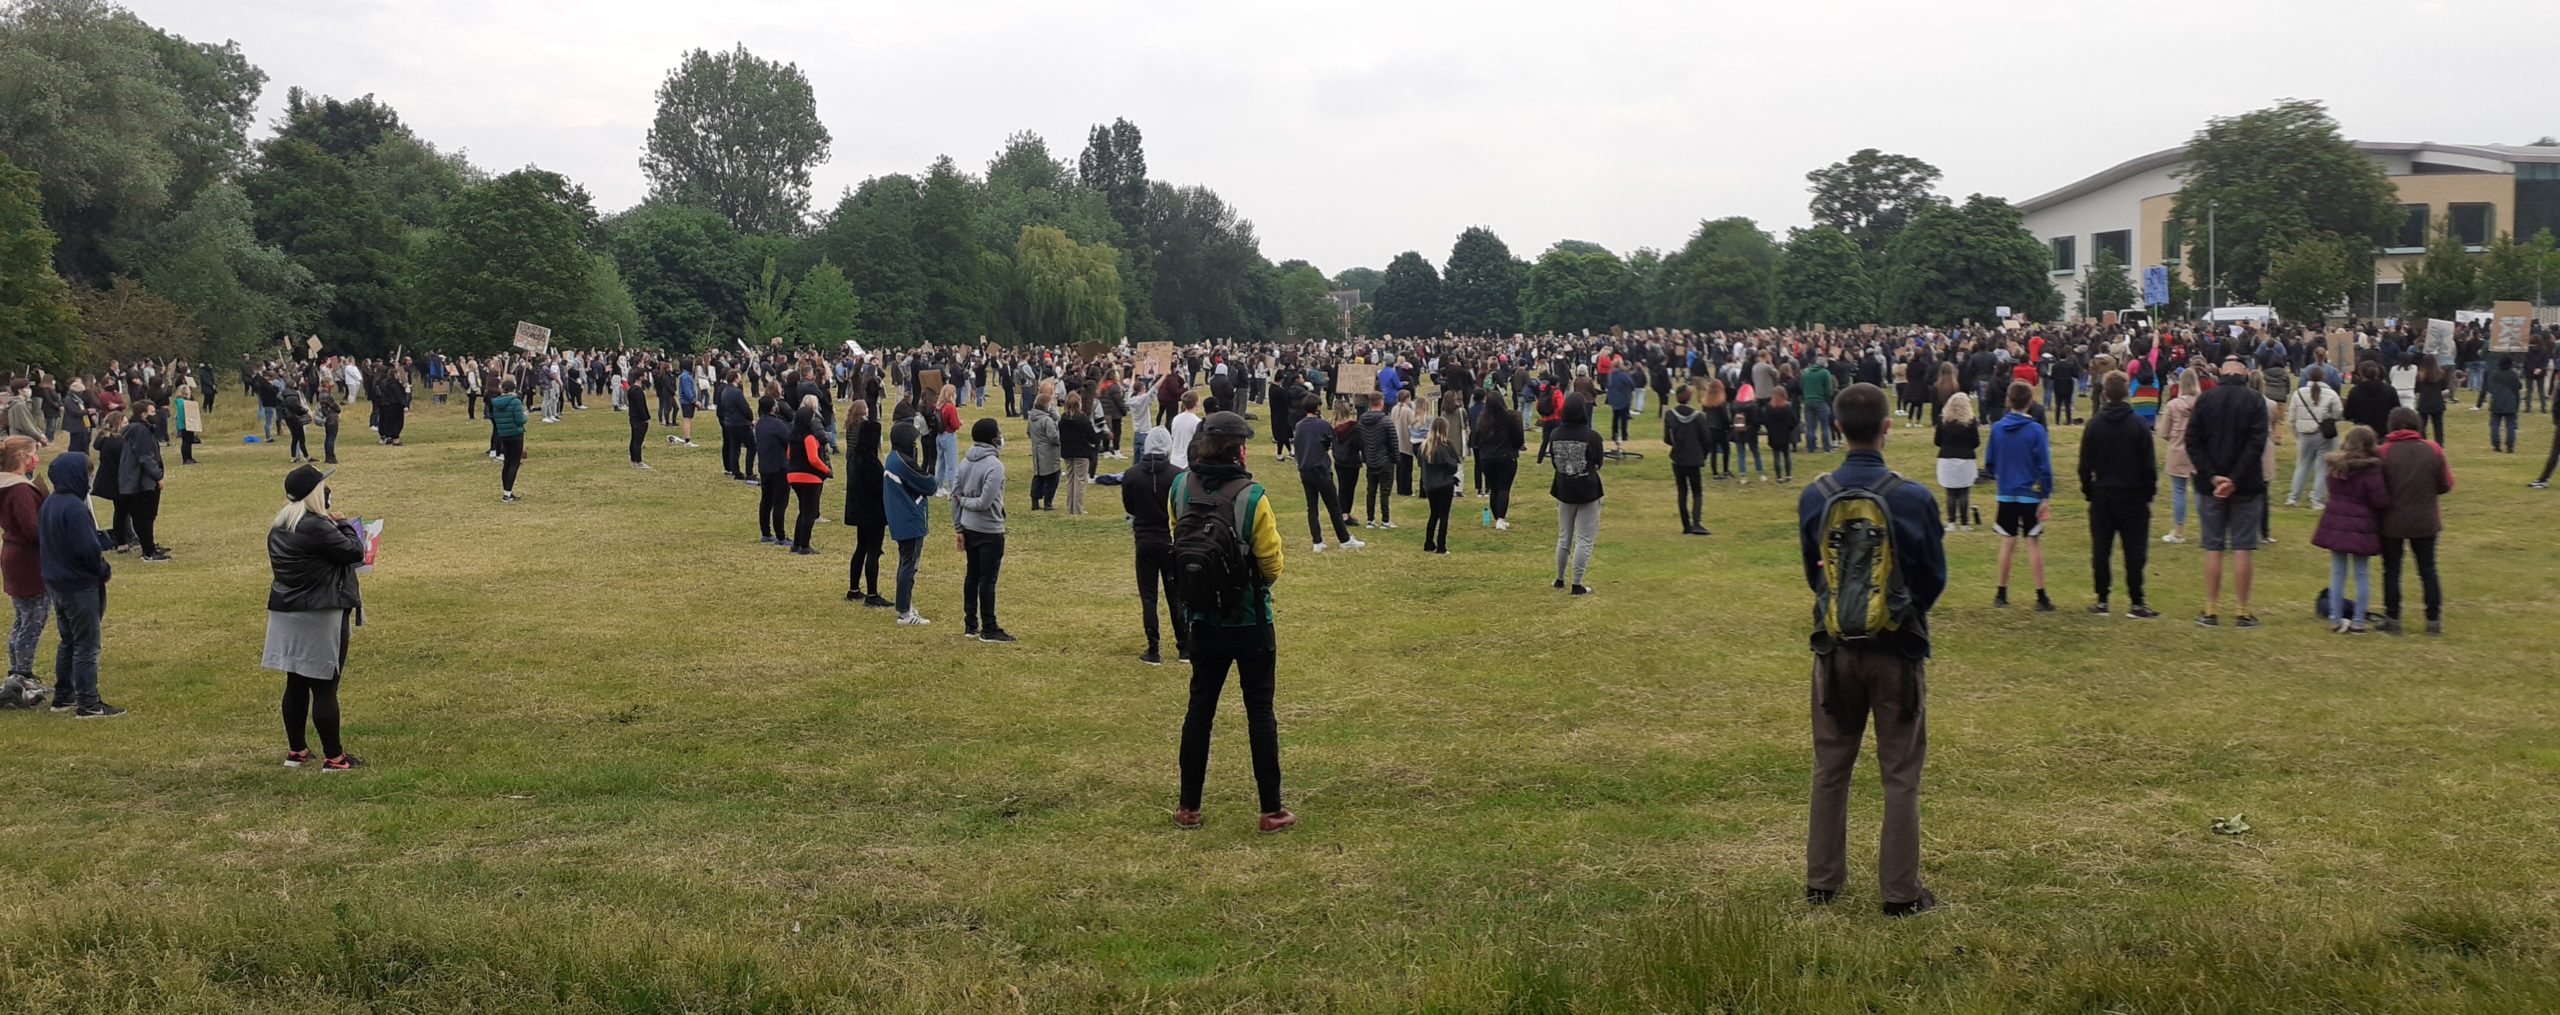 St Albans BLM organiser reports from historic 1,000-strong protest